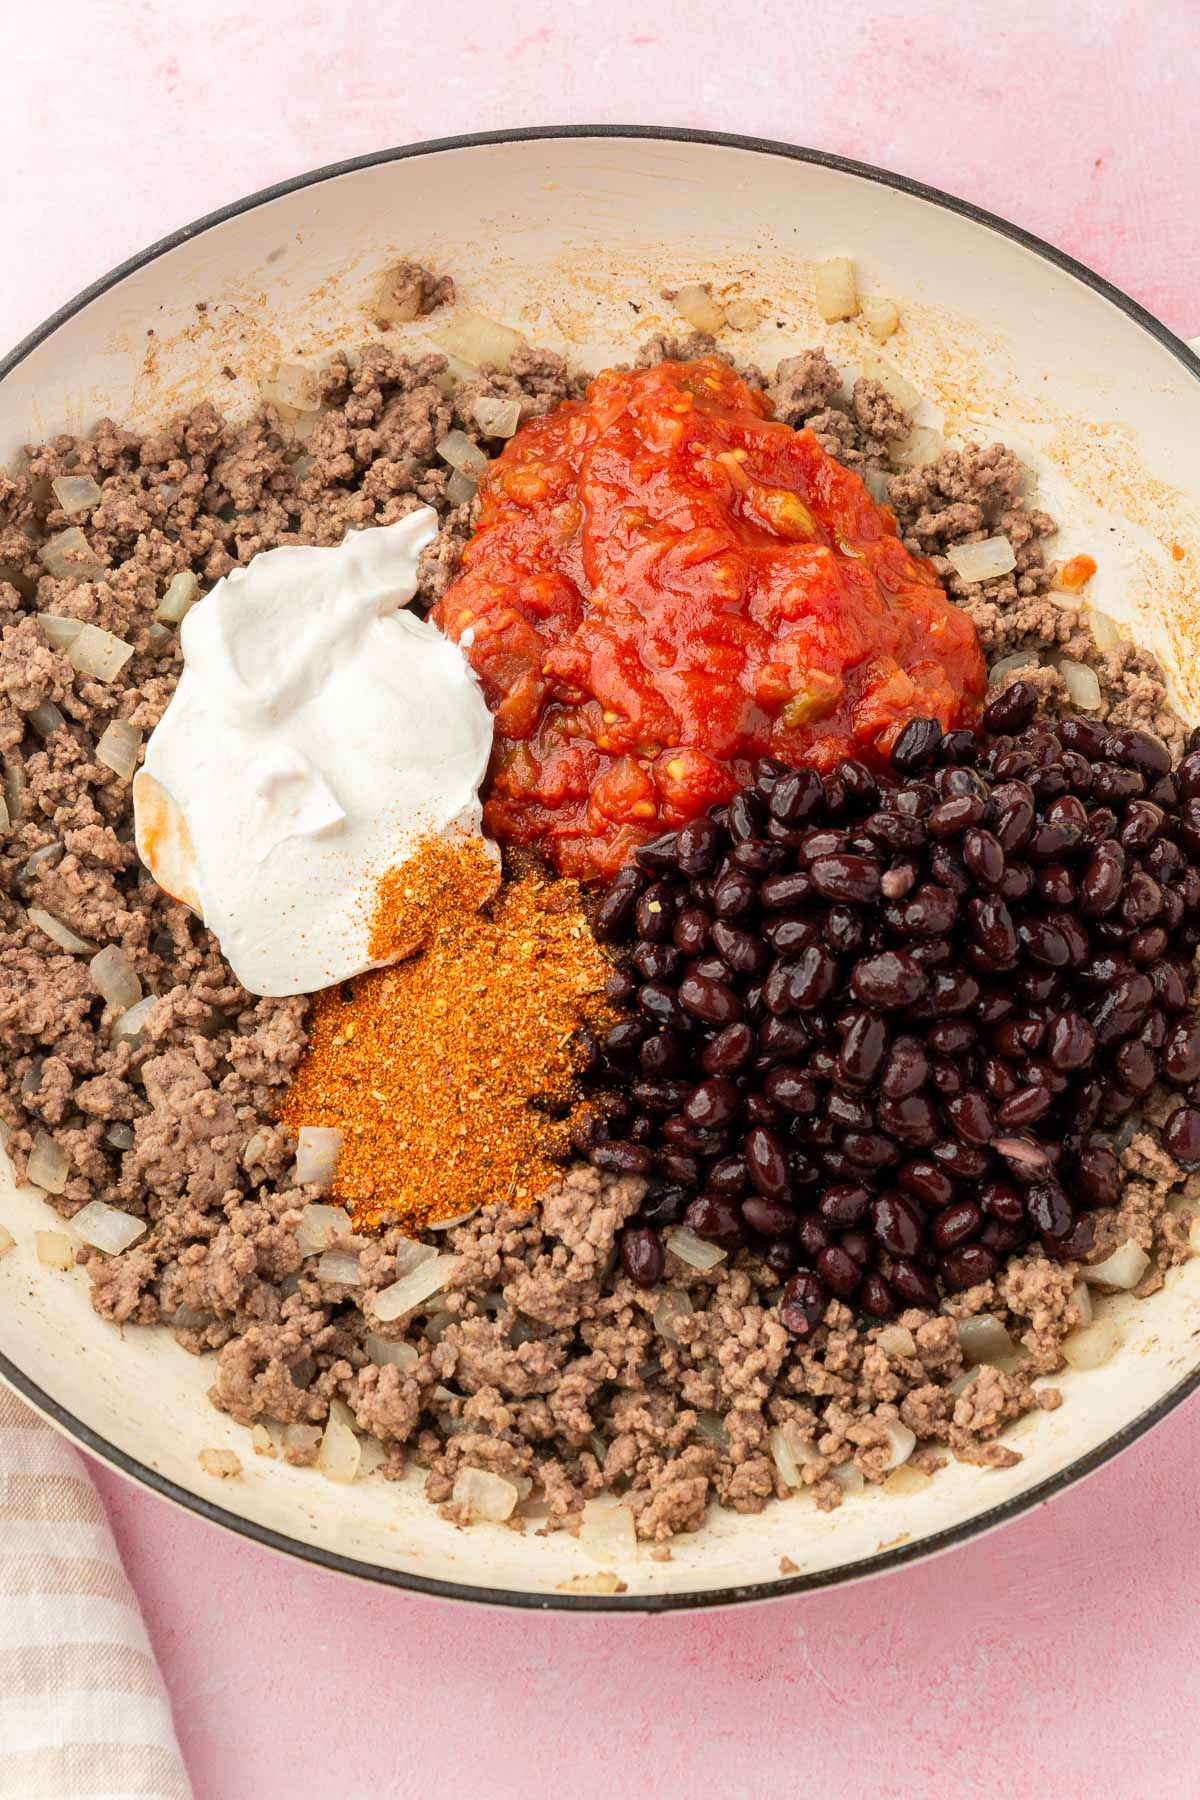 A skillet filled with cooked ground beef and topped with black beans, sour cream, salsa, and gluten-free taco seasoning before mixing together.